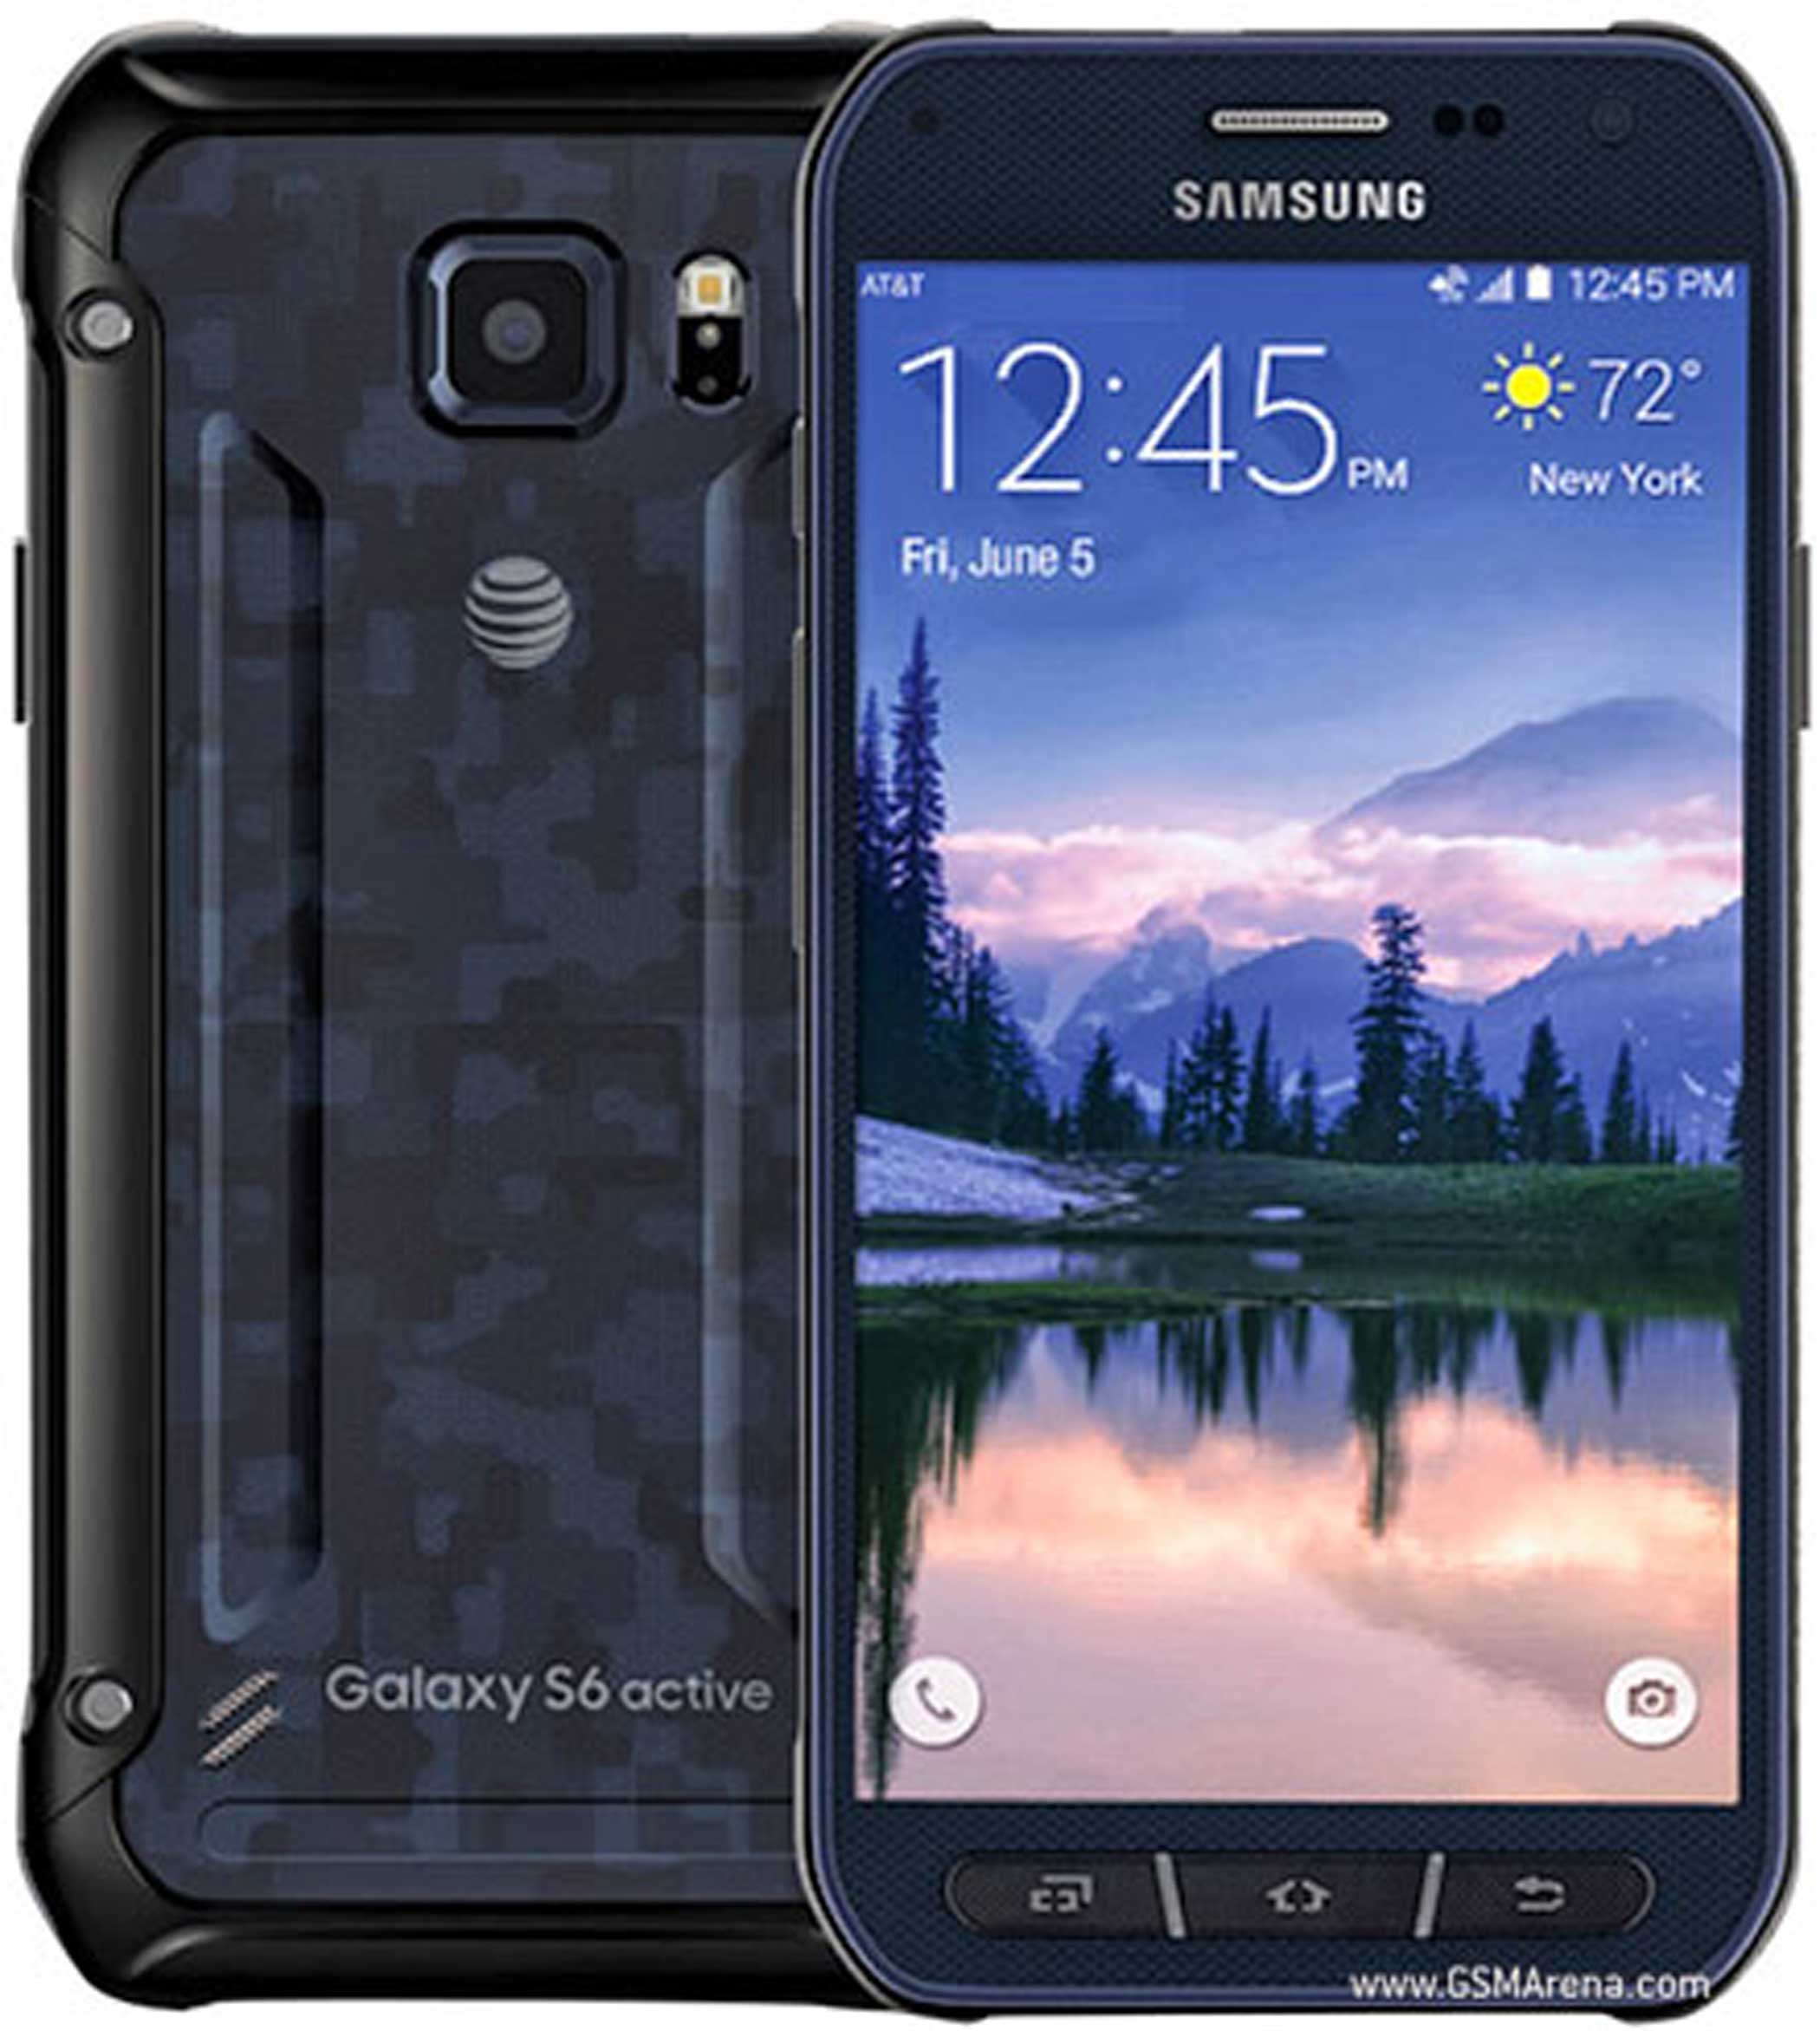 Galaxy S6 Active - This phone is almost identical to the Galaxy S6 internally, but plastic and rubber casing make it dust and water-proof. The phone is also bulkier and has a larger battery for extended battery life.